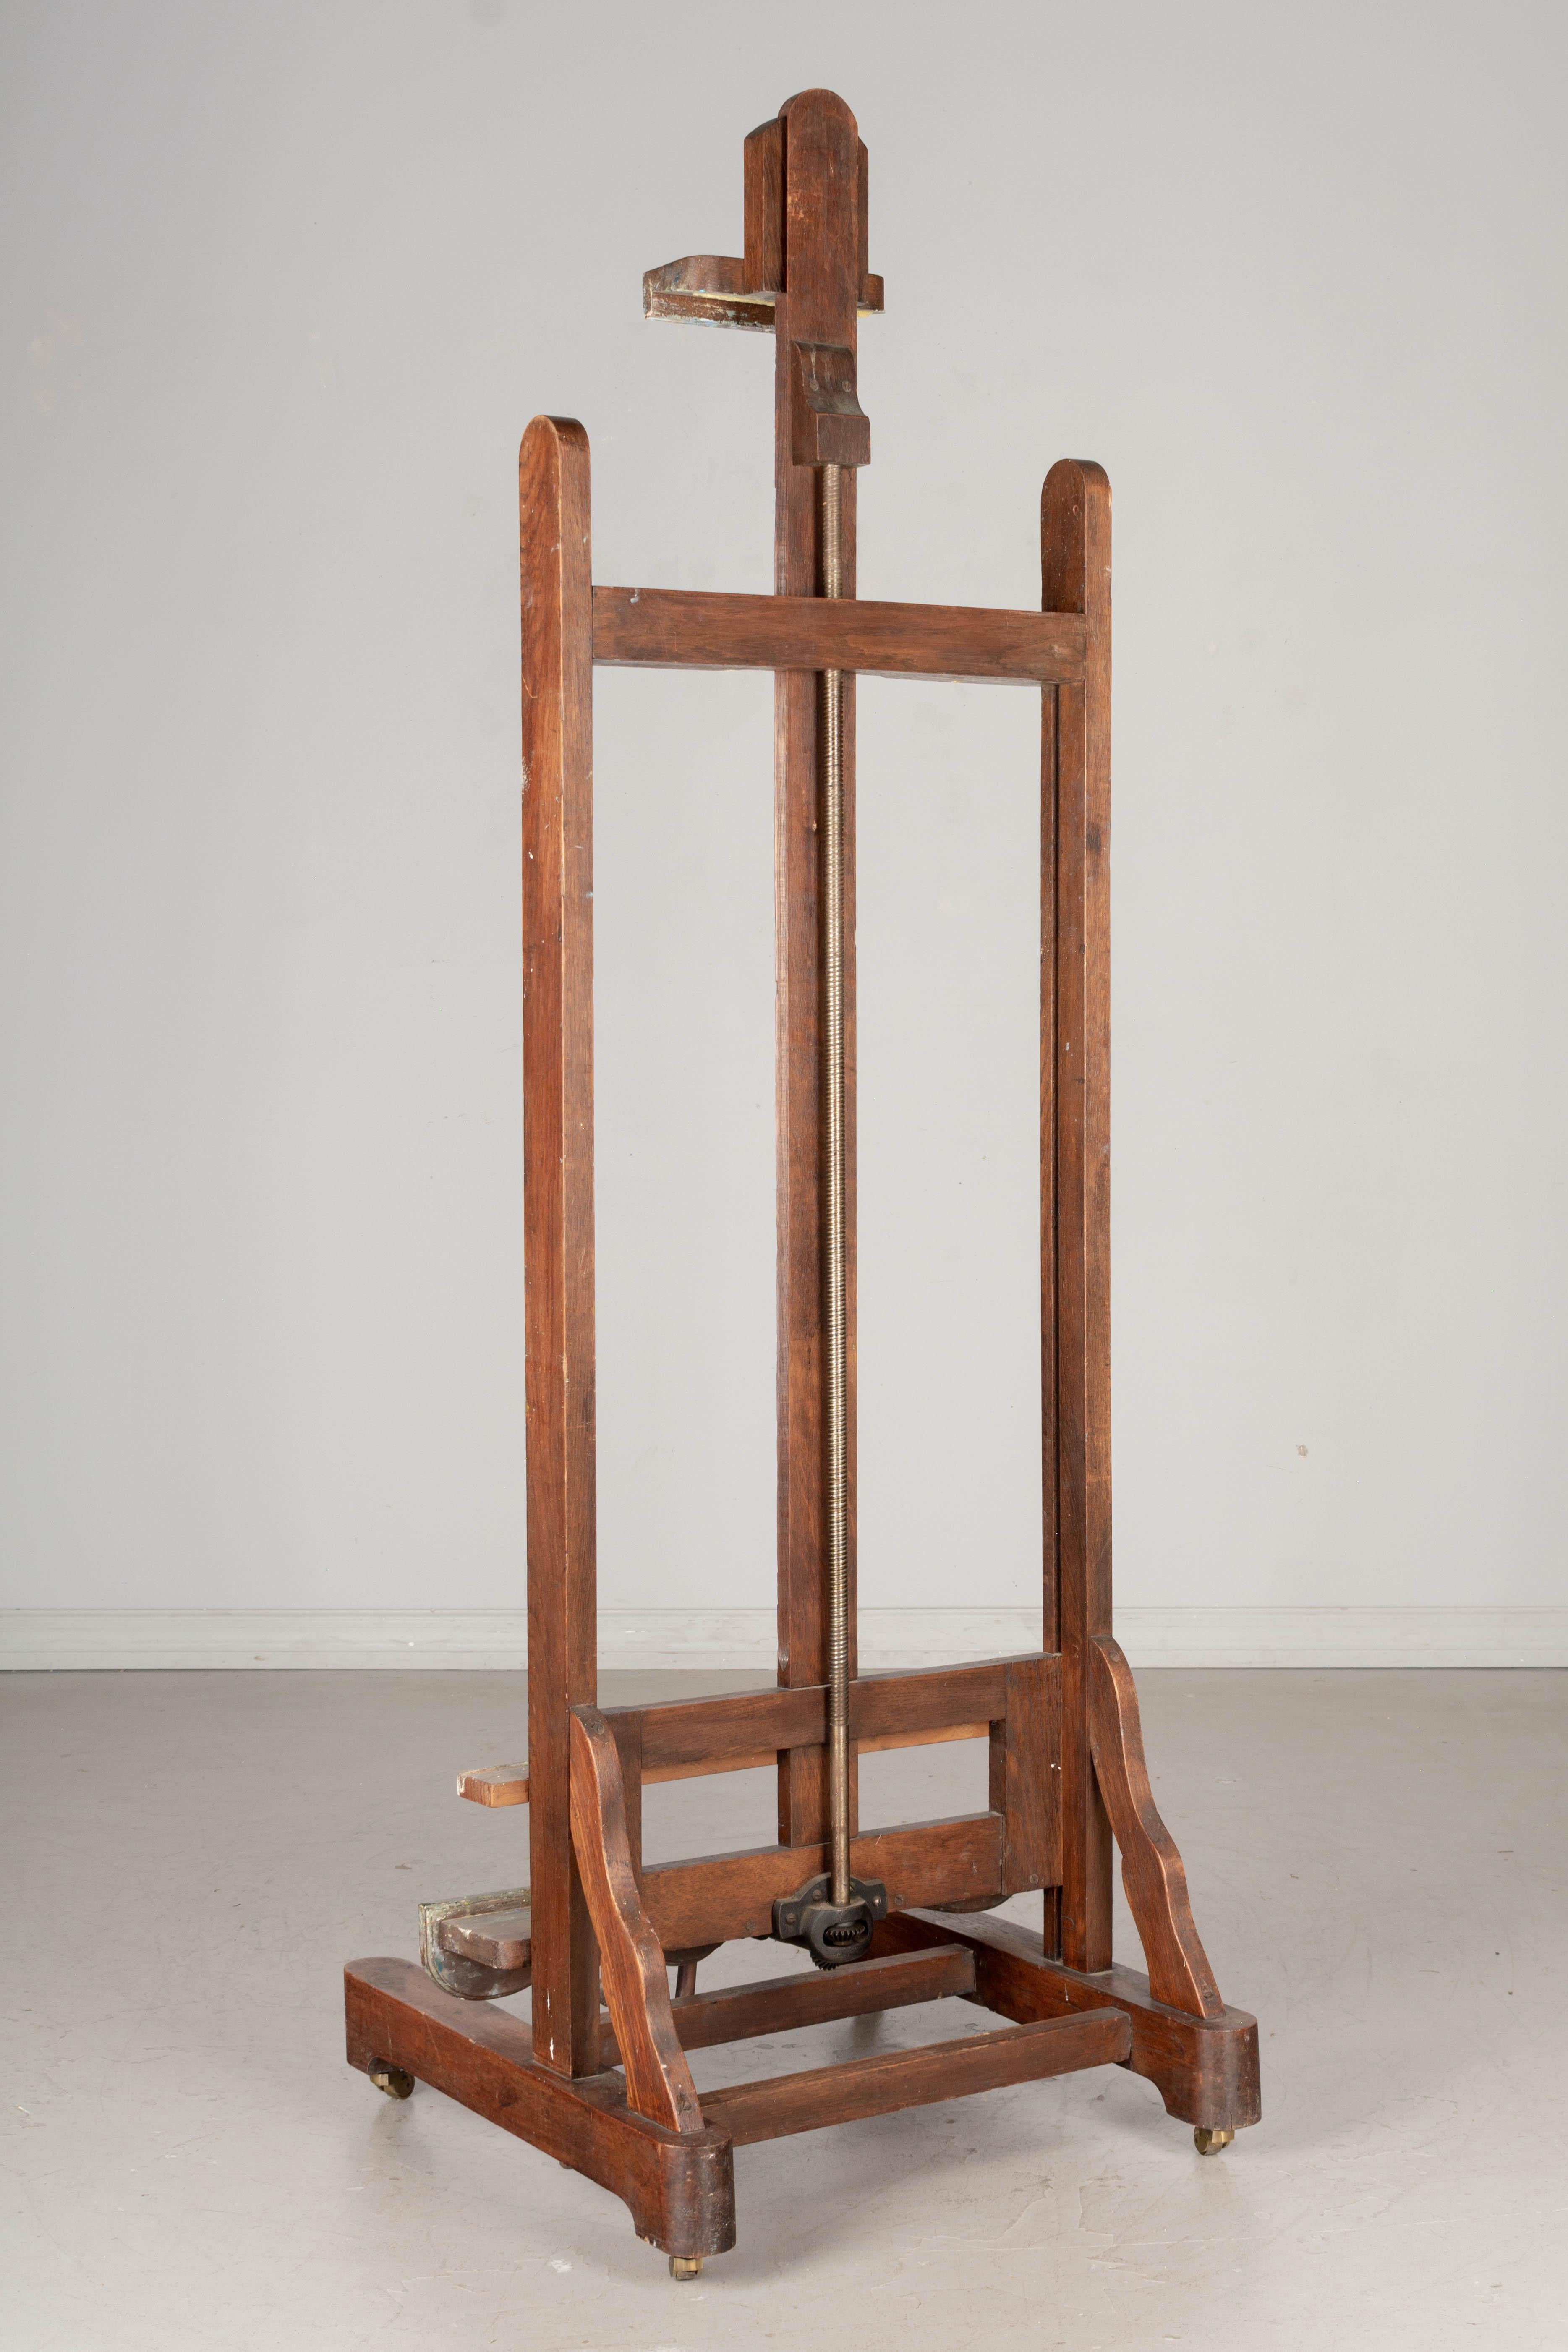 20th Century French Chevalet or Painter's Easel, circa 1900